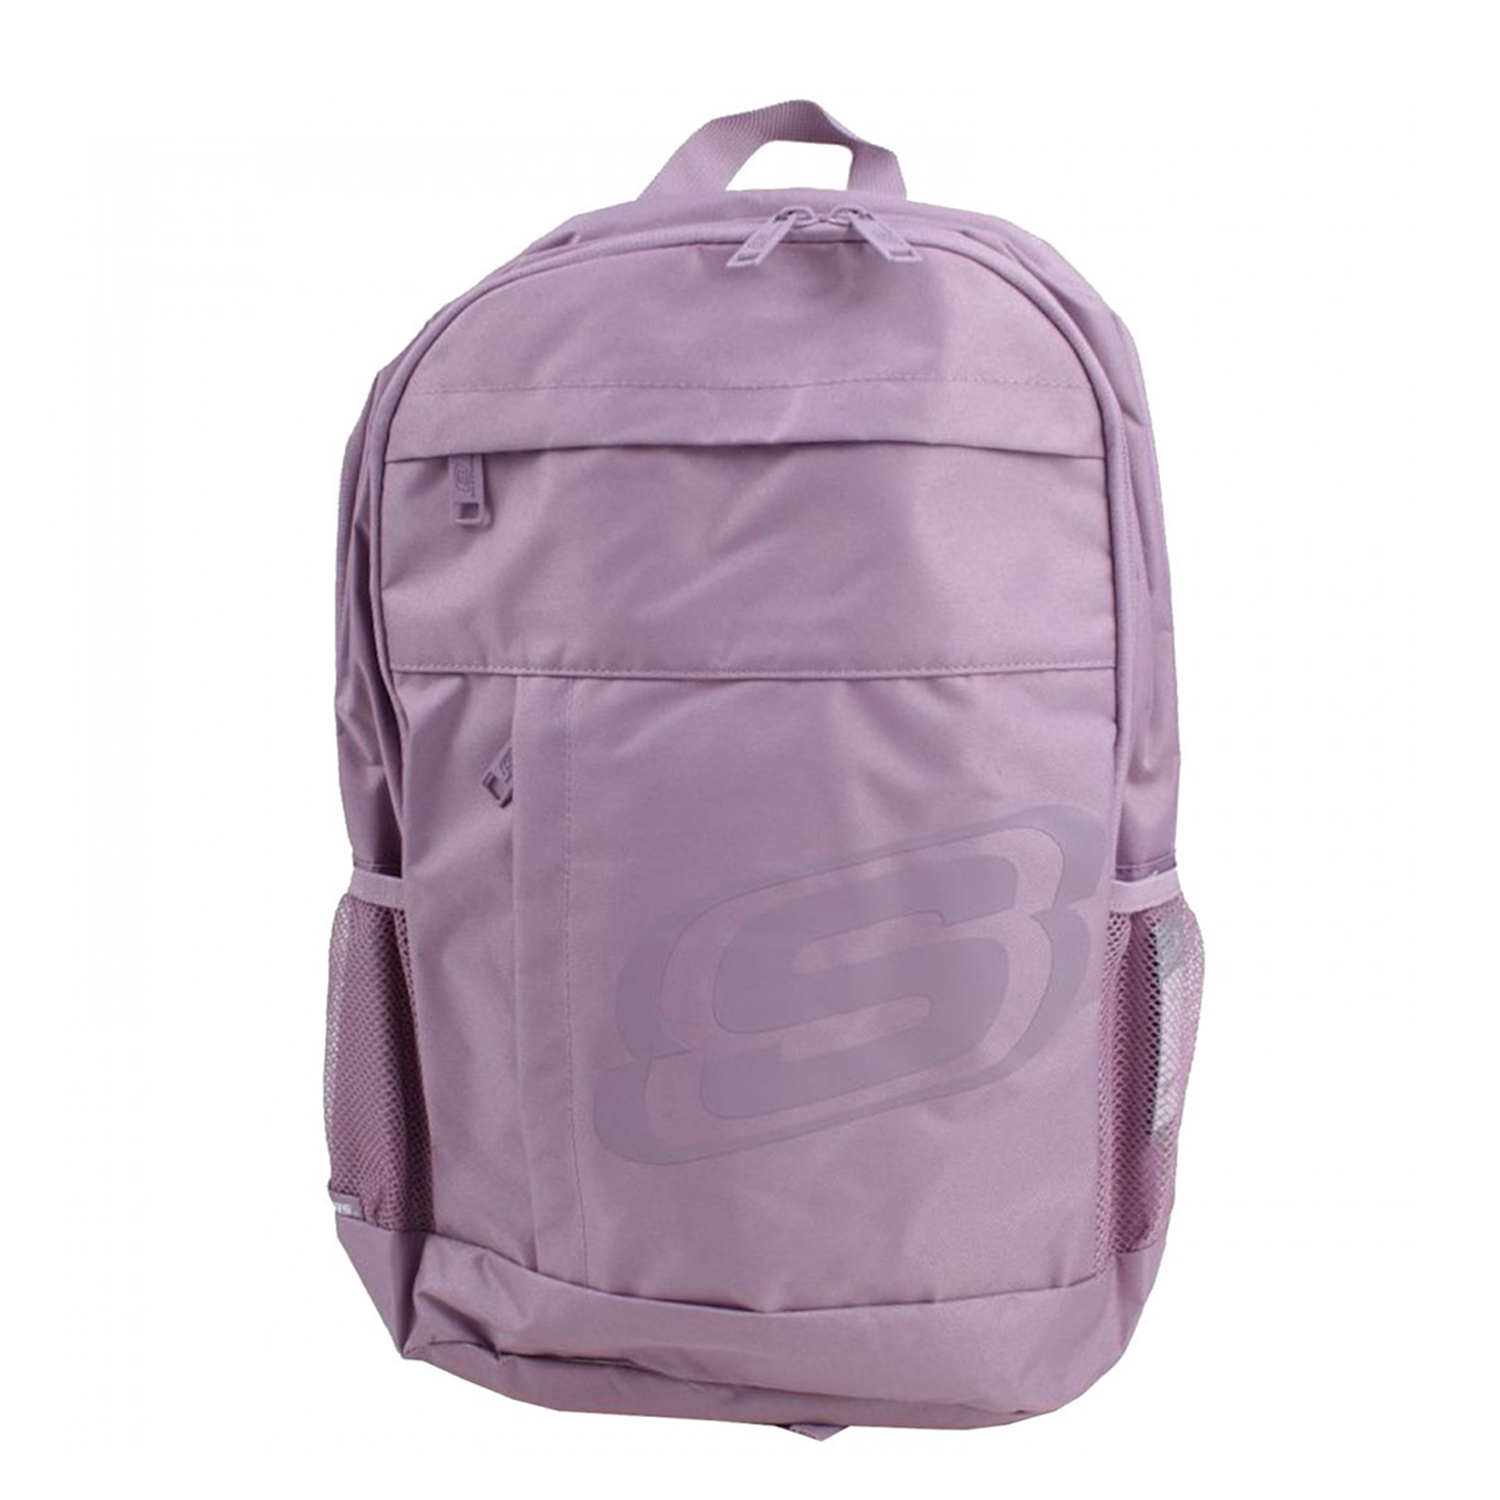 Foto de producto: Central backpack